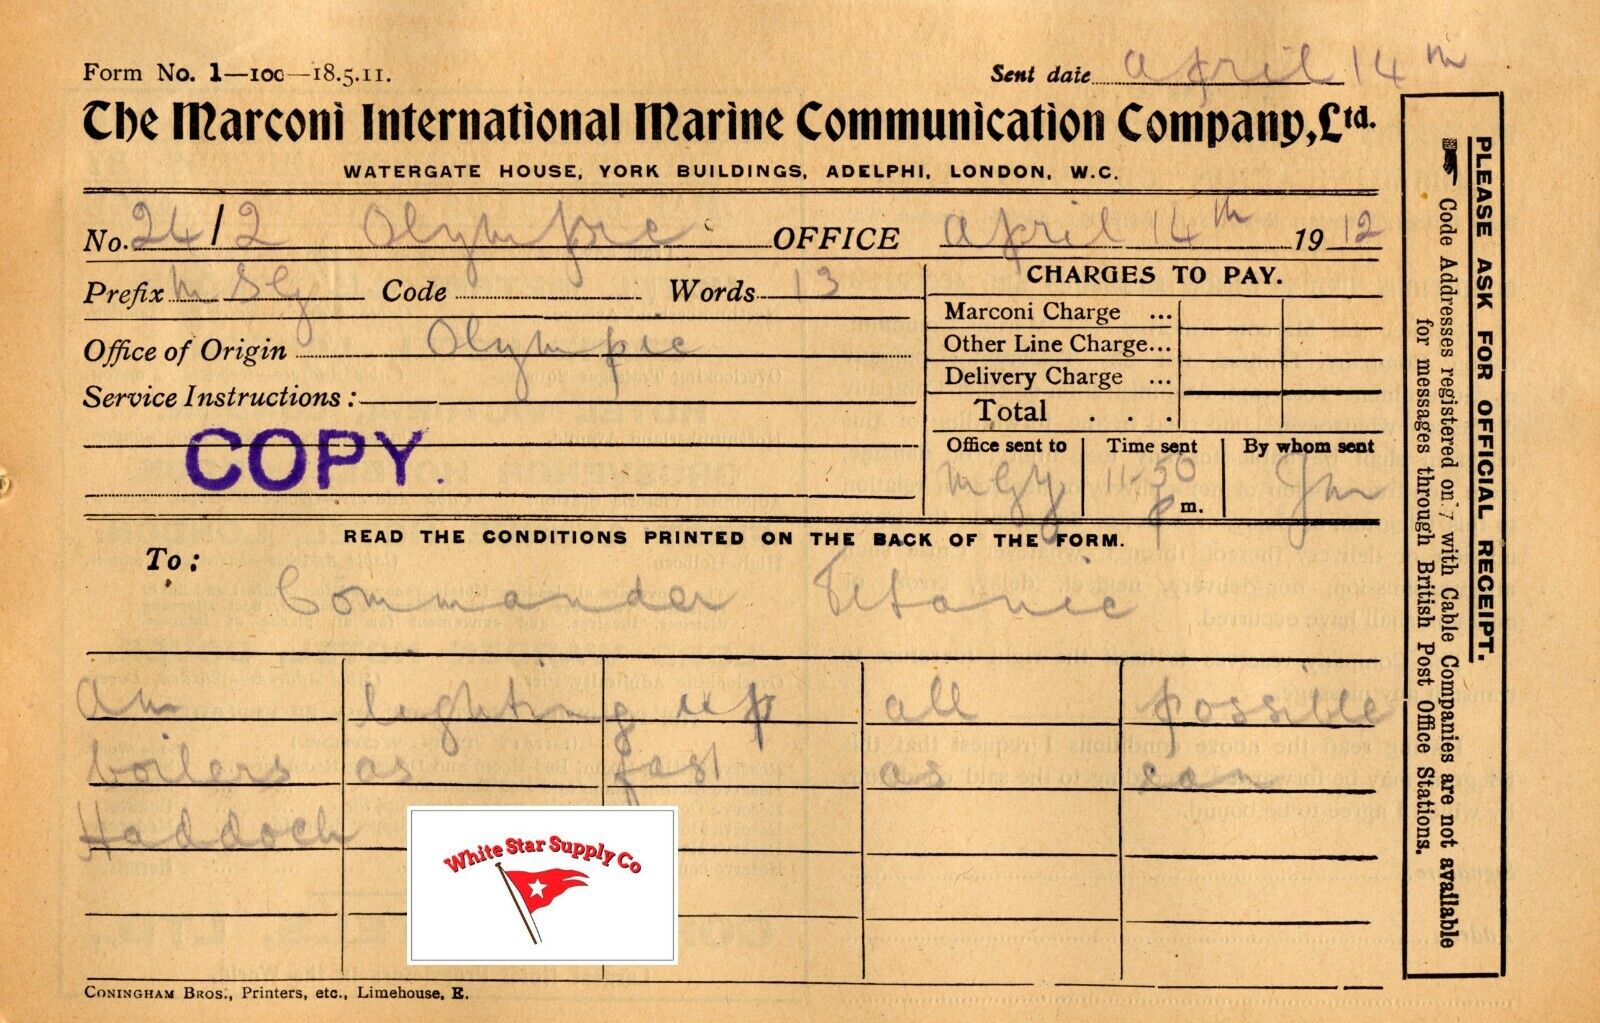 RMS Olympic wire message from Haddock-Smith, April 14, 1912 \